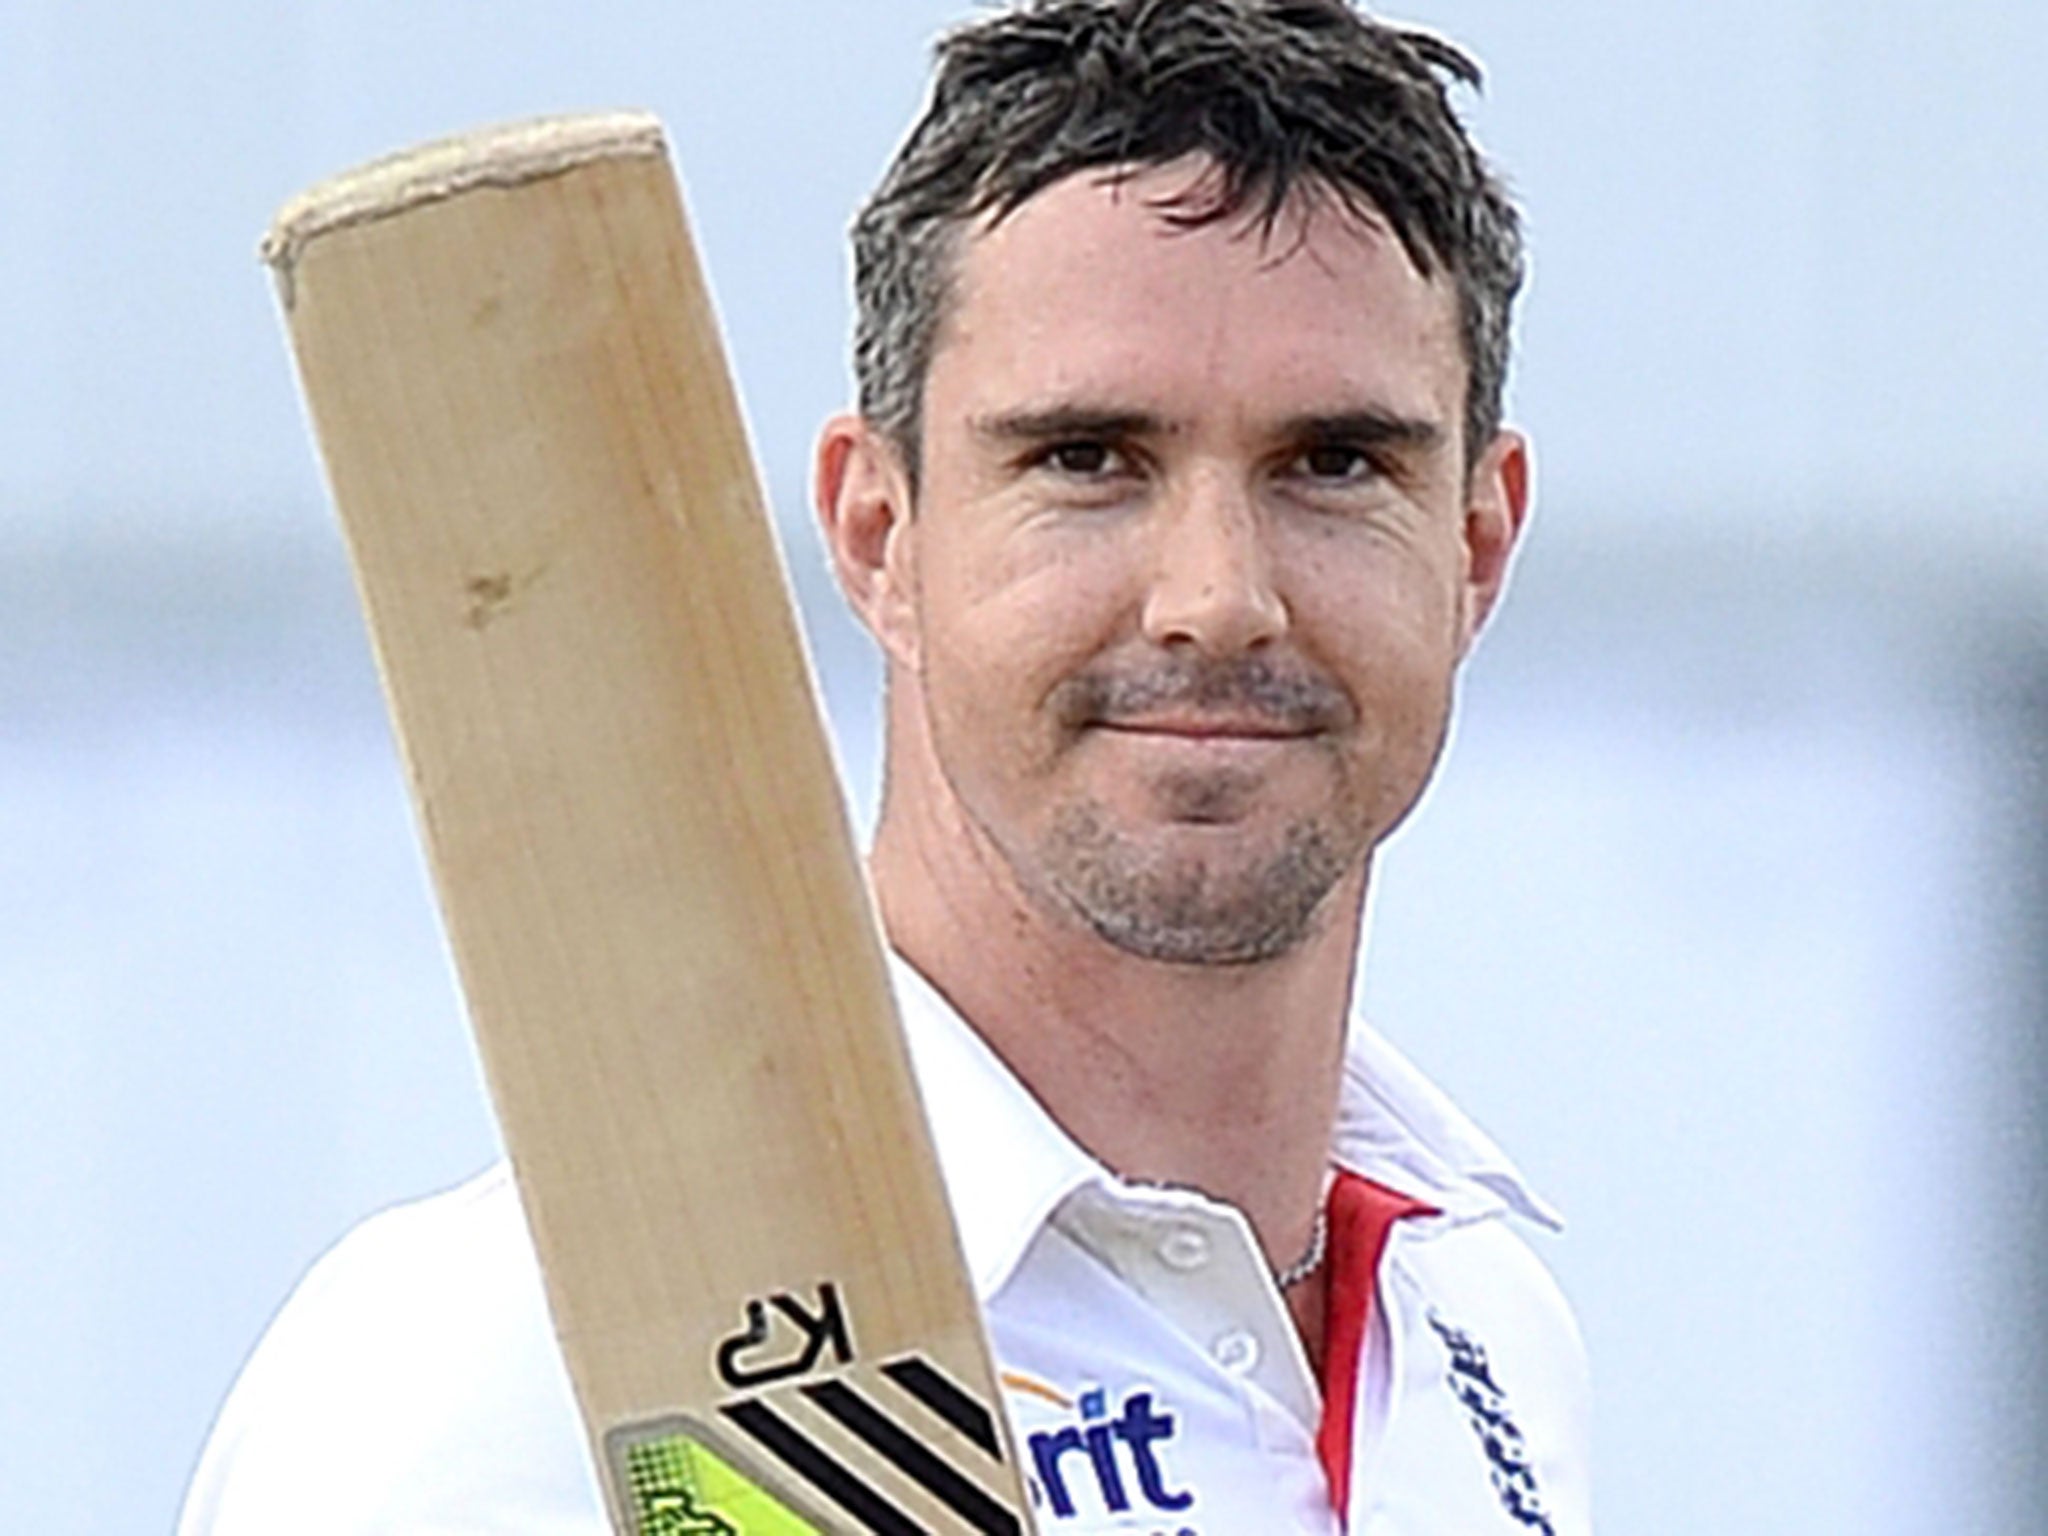 Despite his enthusiasm, Kevin Pietersen’s return to the England Test team is a rather long shot